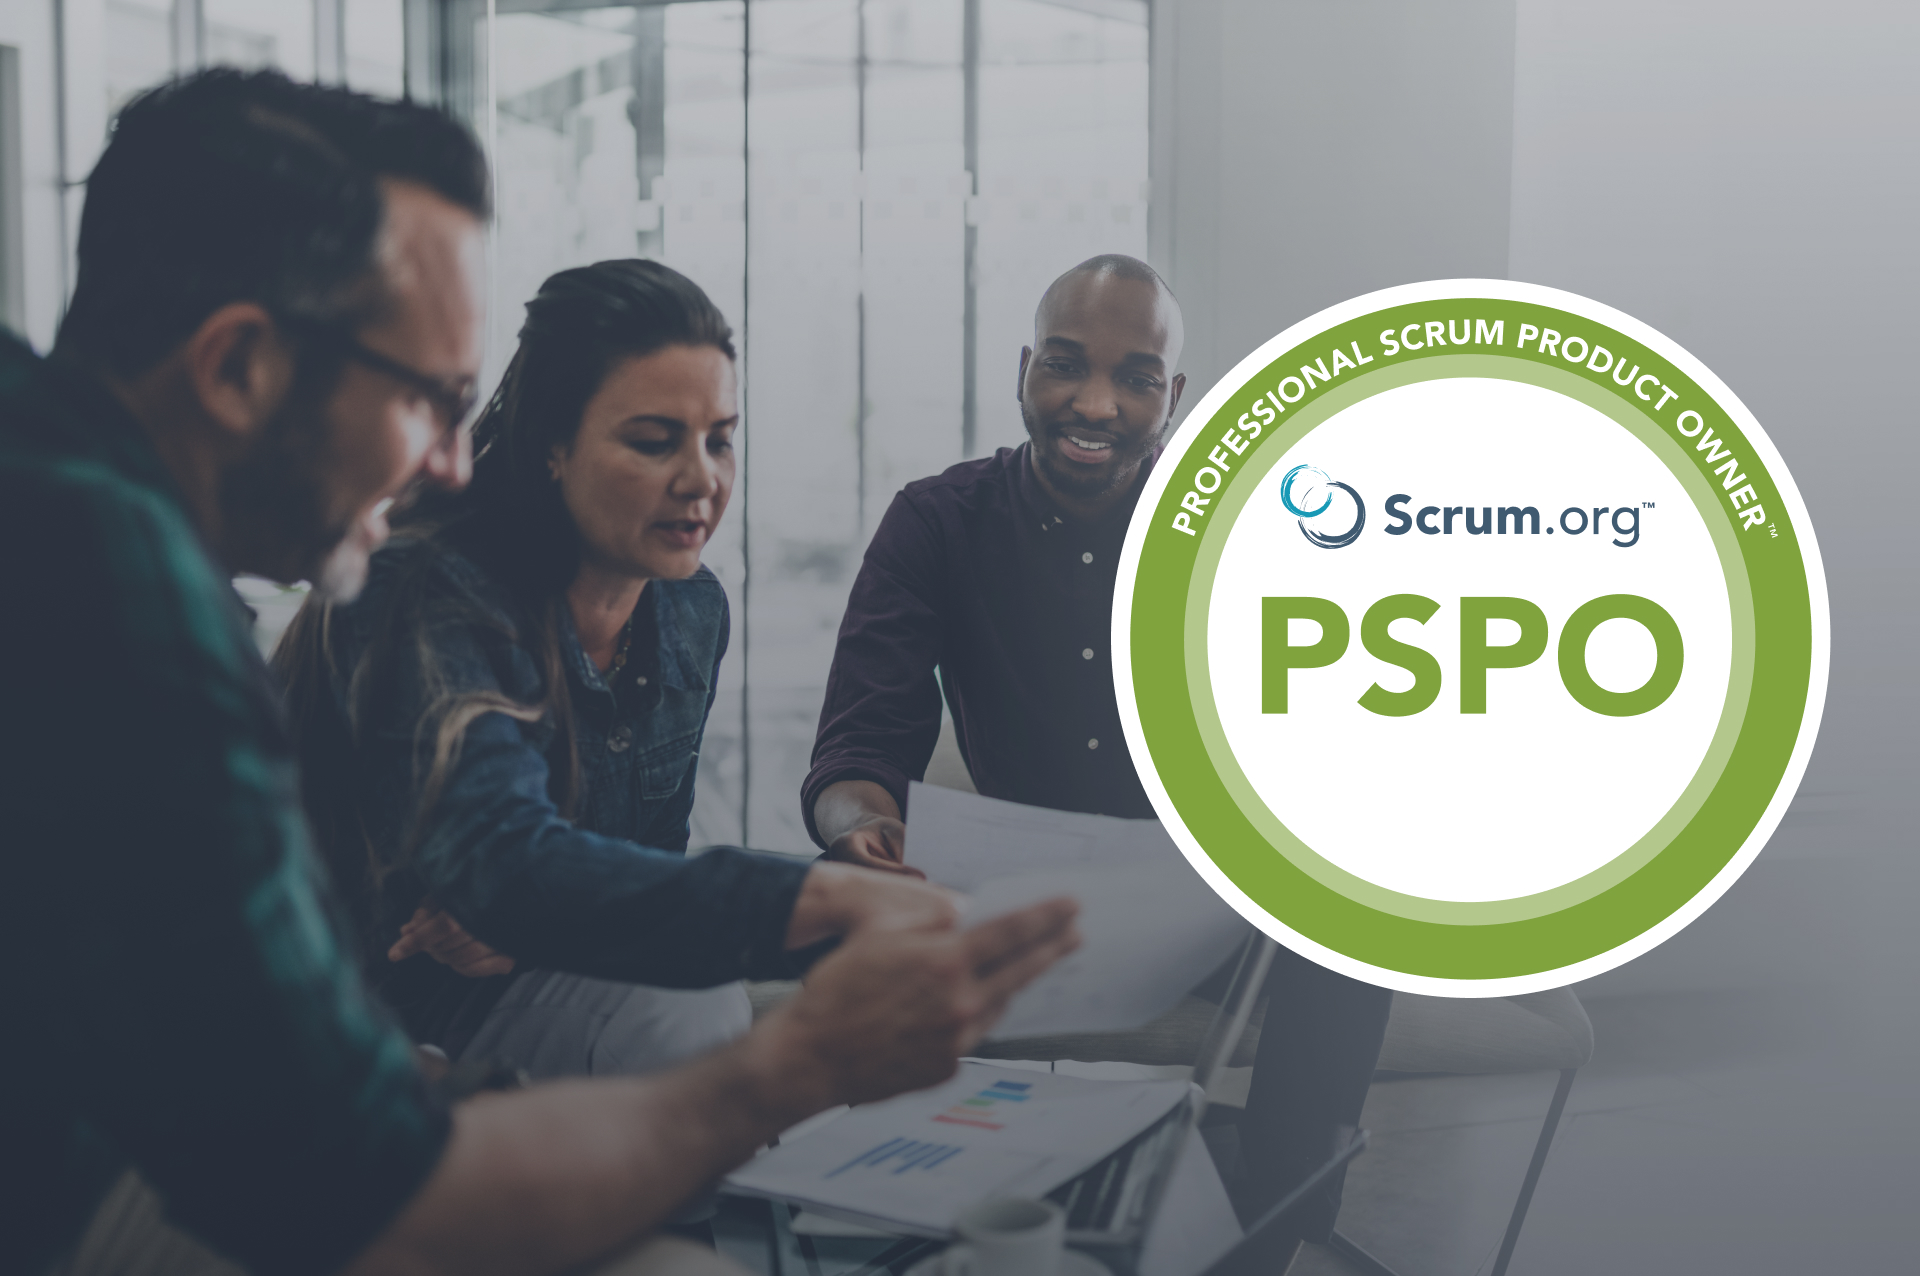 PSPO - Professional Scrum Product Owner™